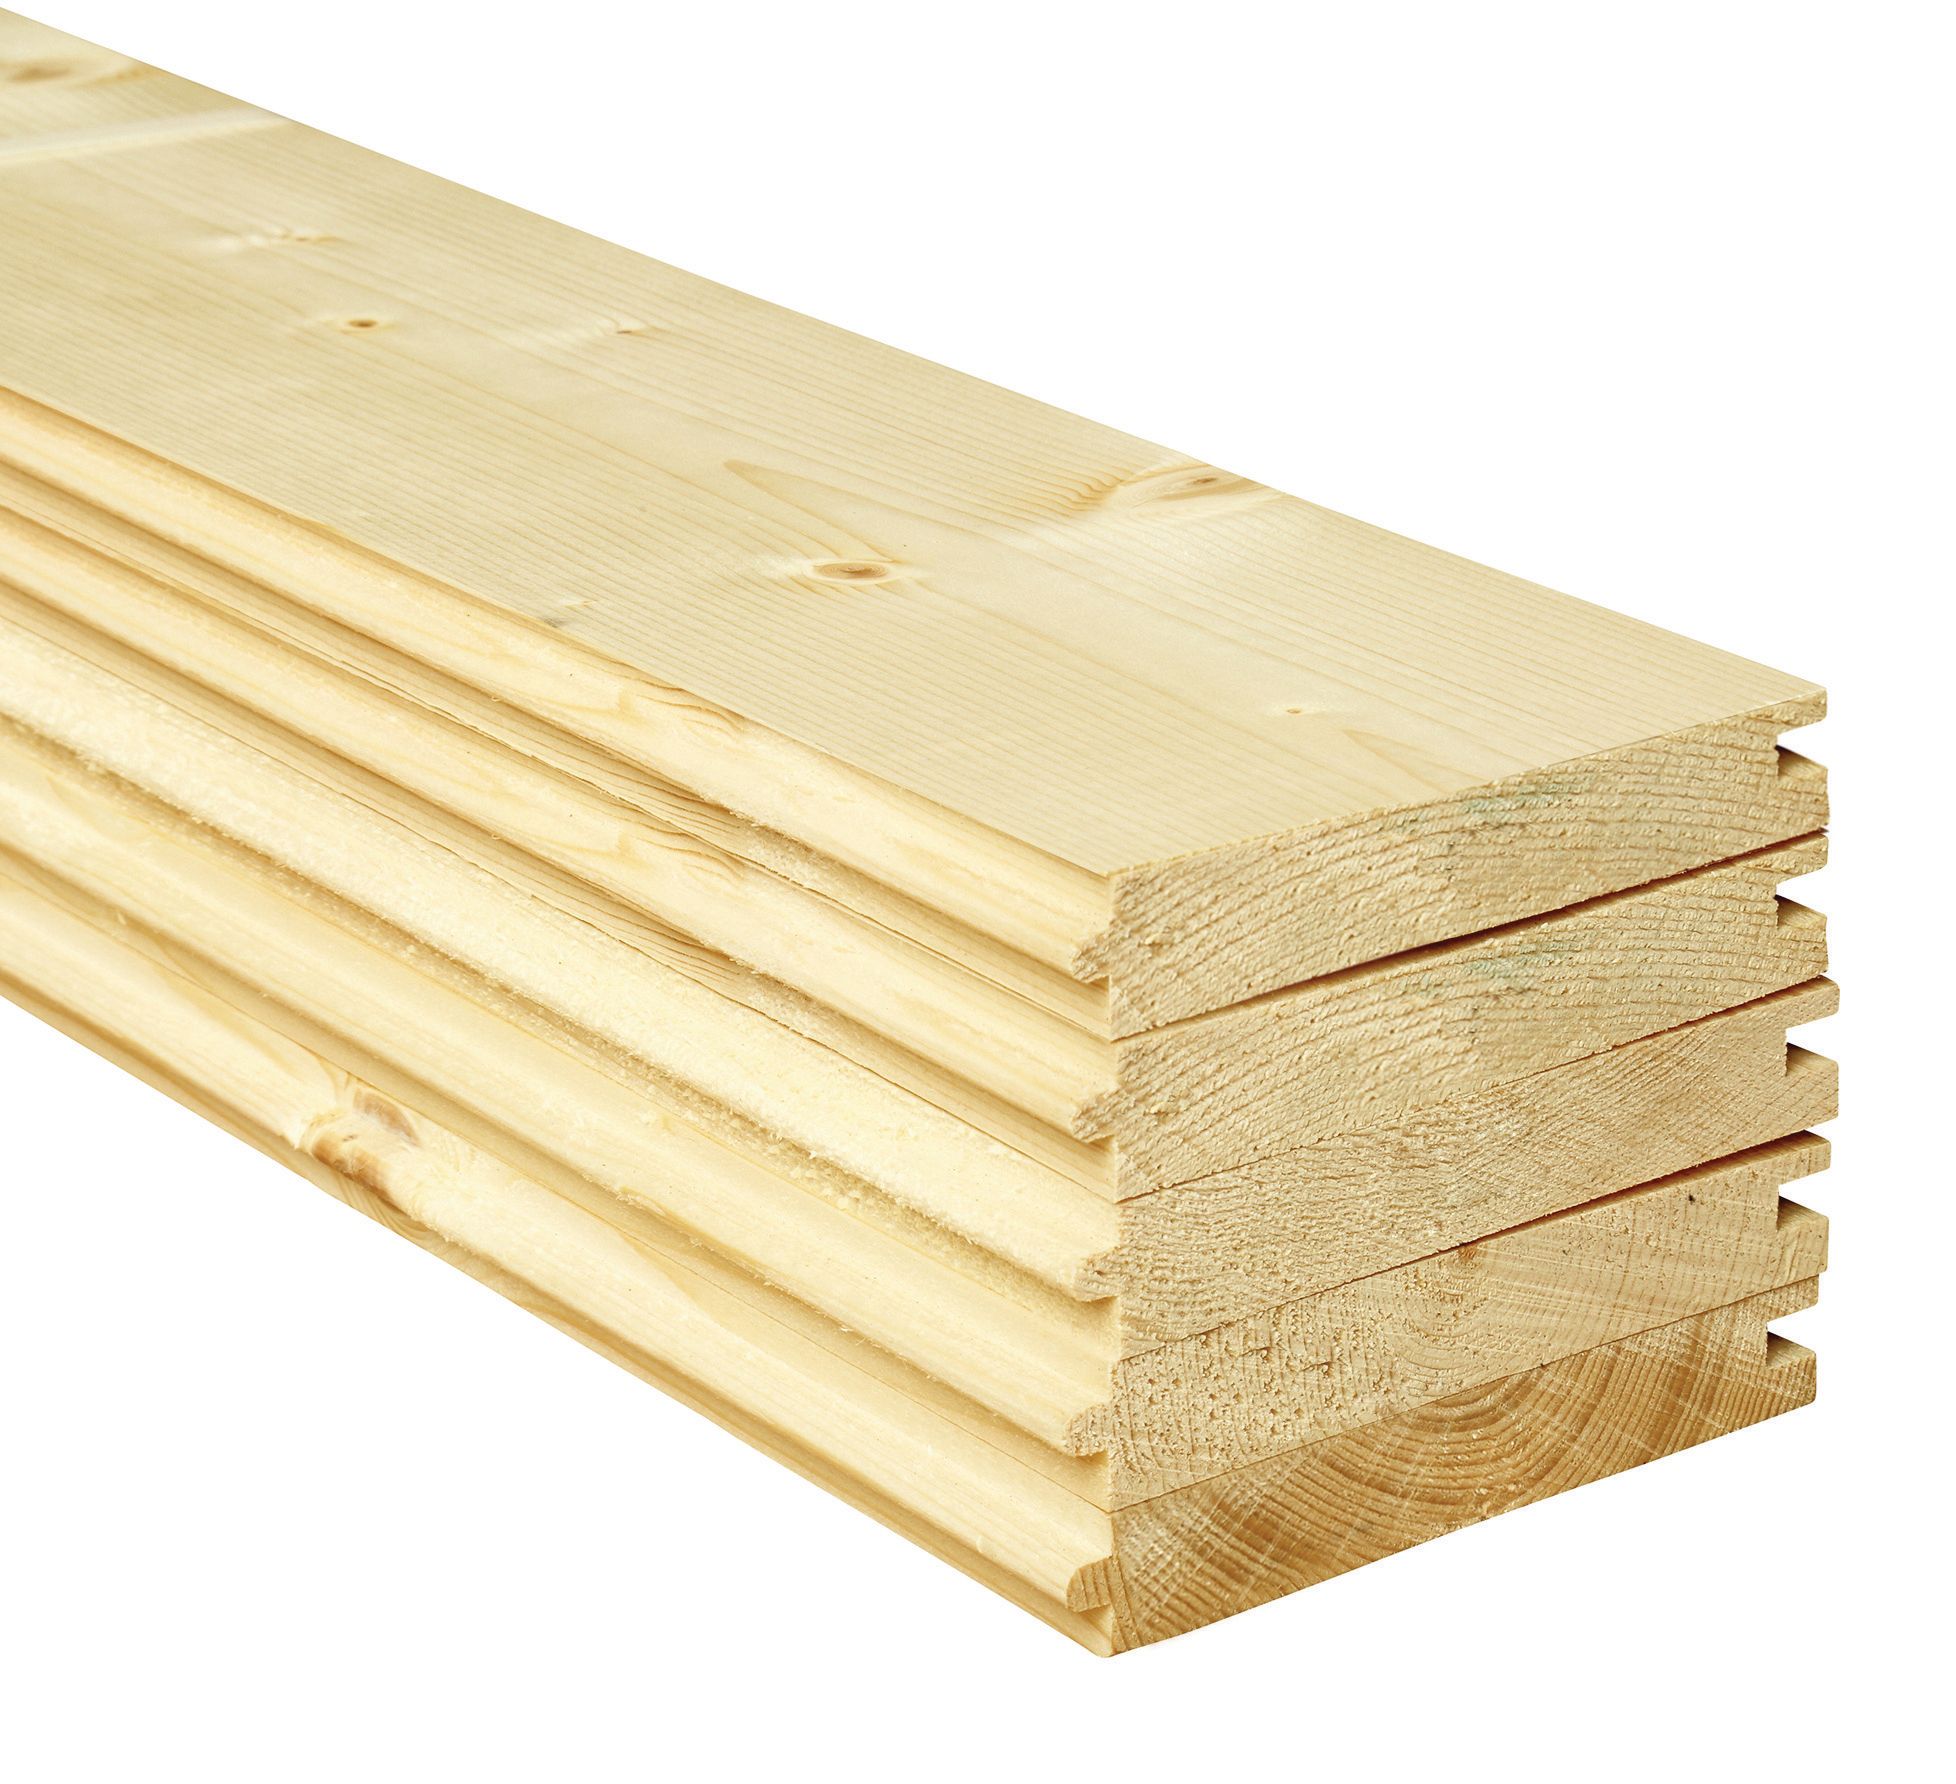 Image of Wickes PTG Timber Floorboards - 18mm x 144mm x 2400mm - Pack of 5